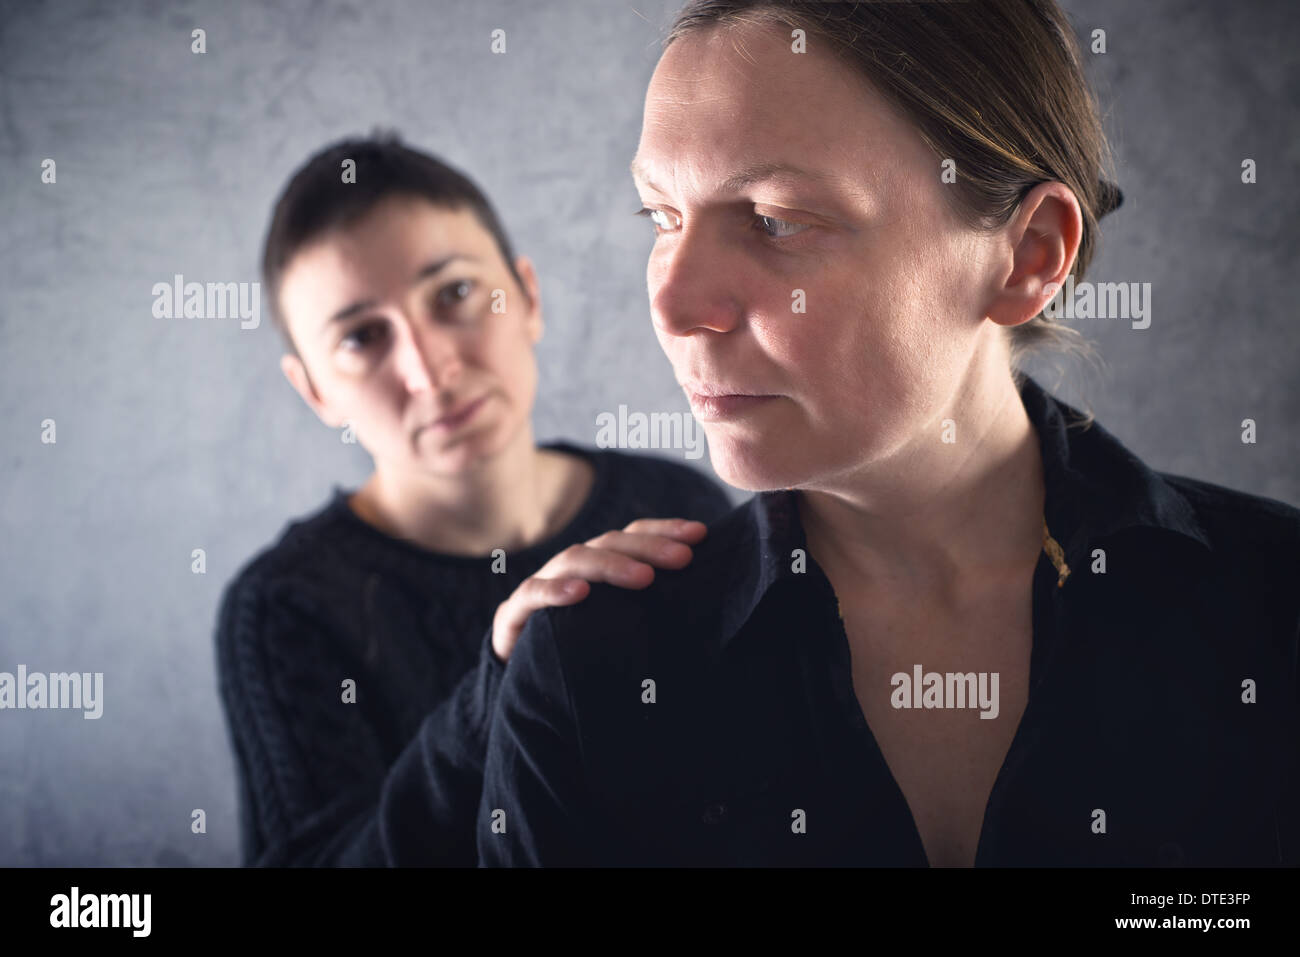 Comforting friend. Woman consoling her sad friend with hand on shoulder. Stock Photo